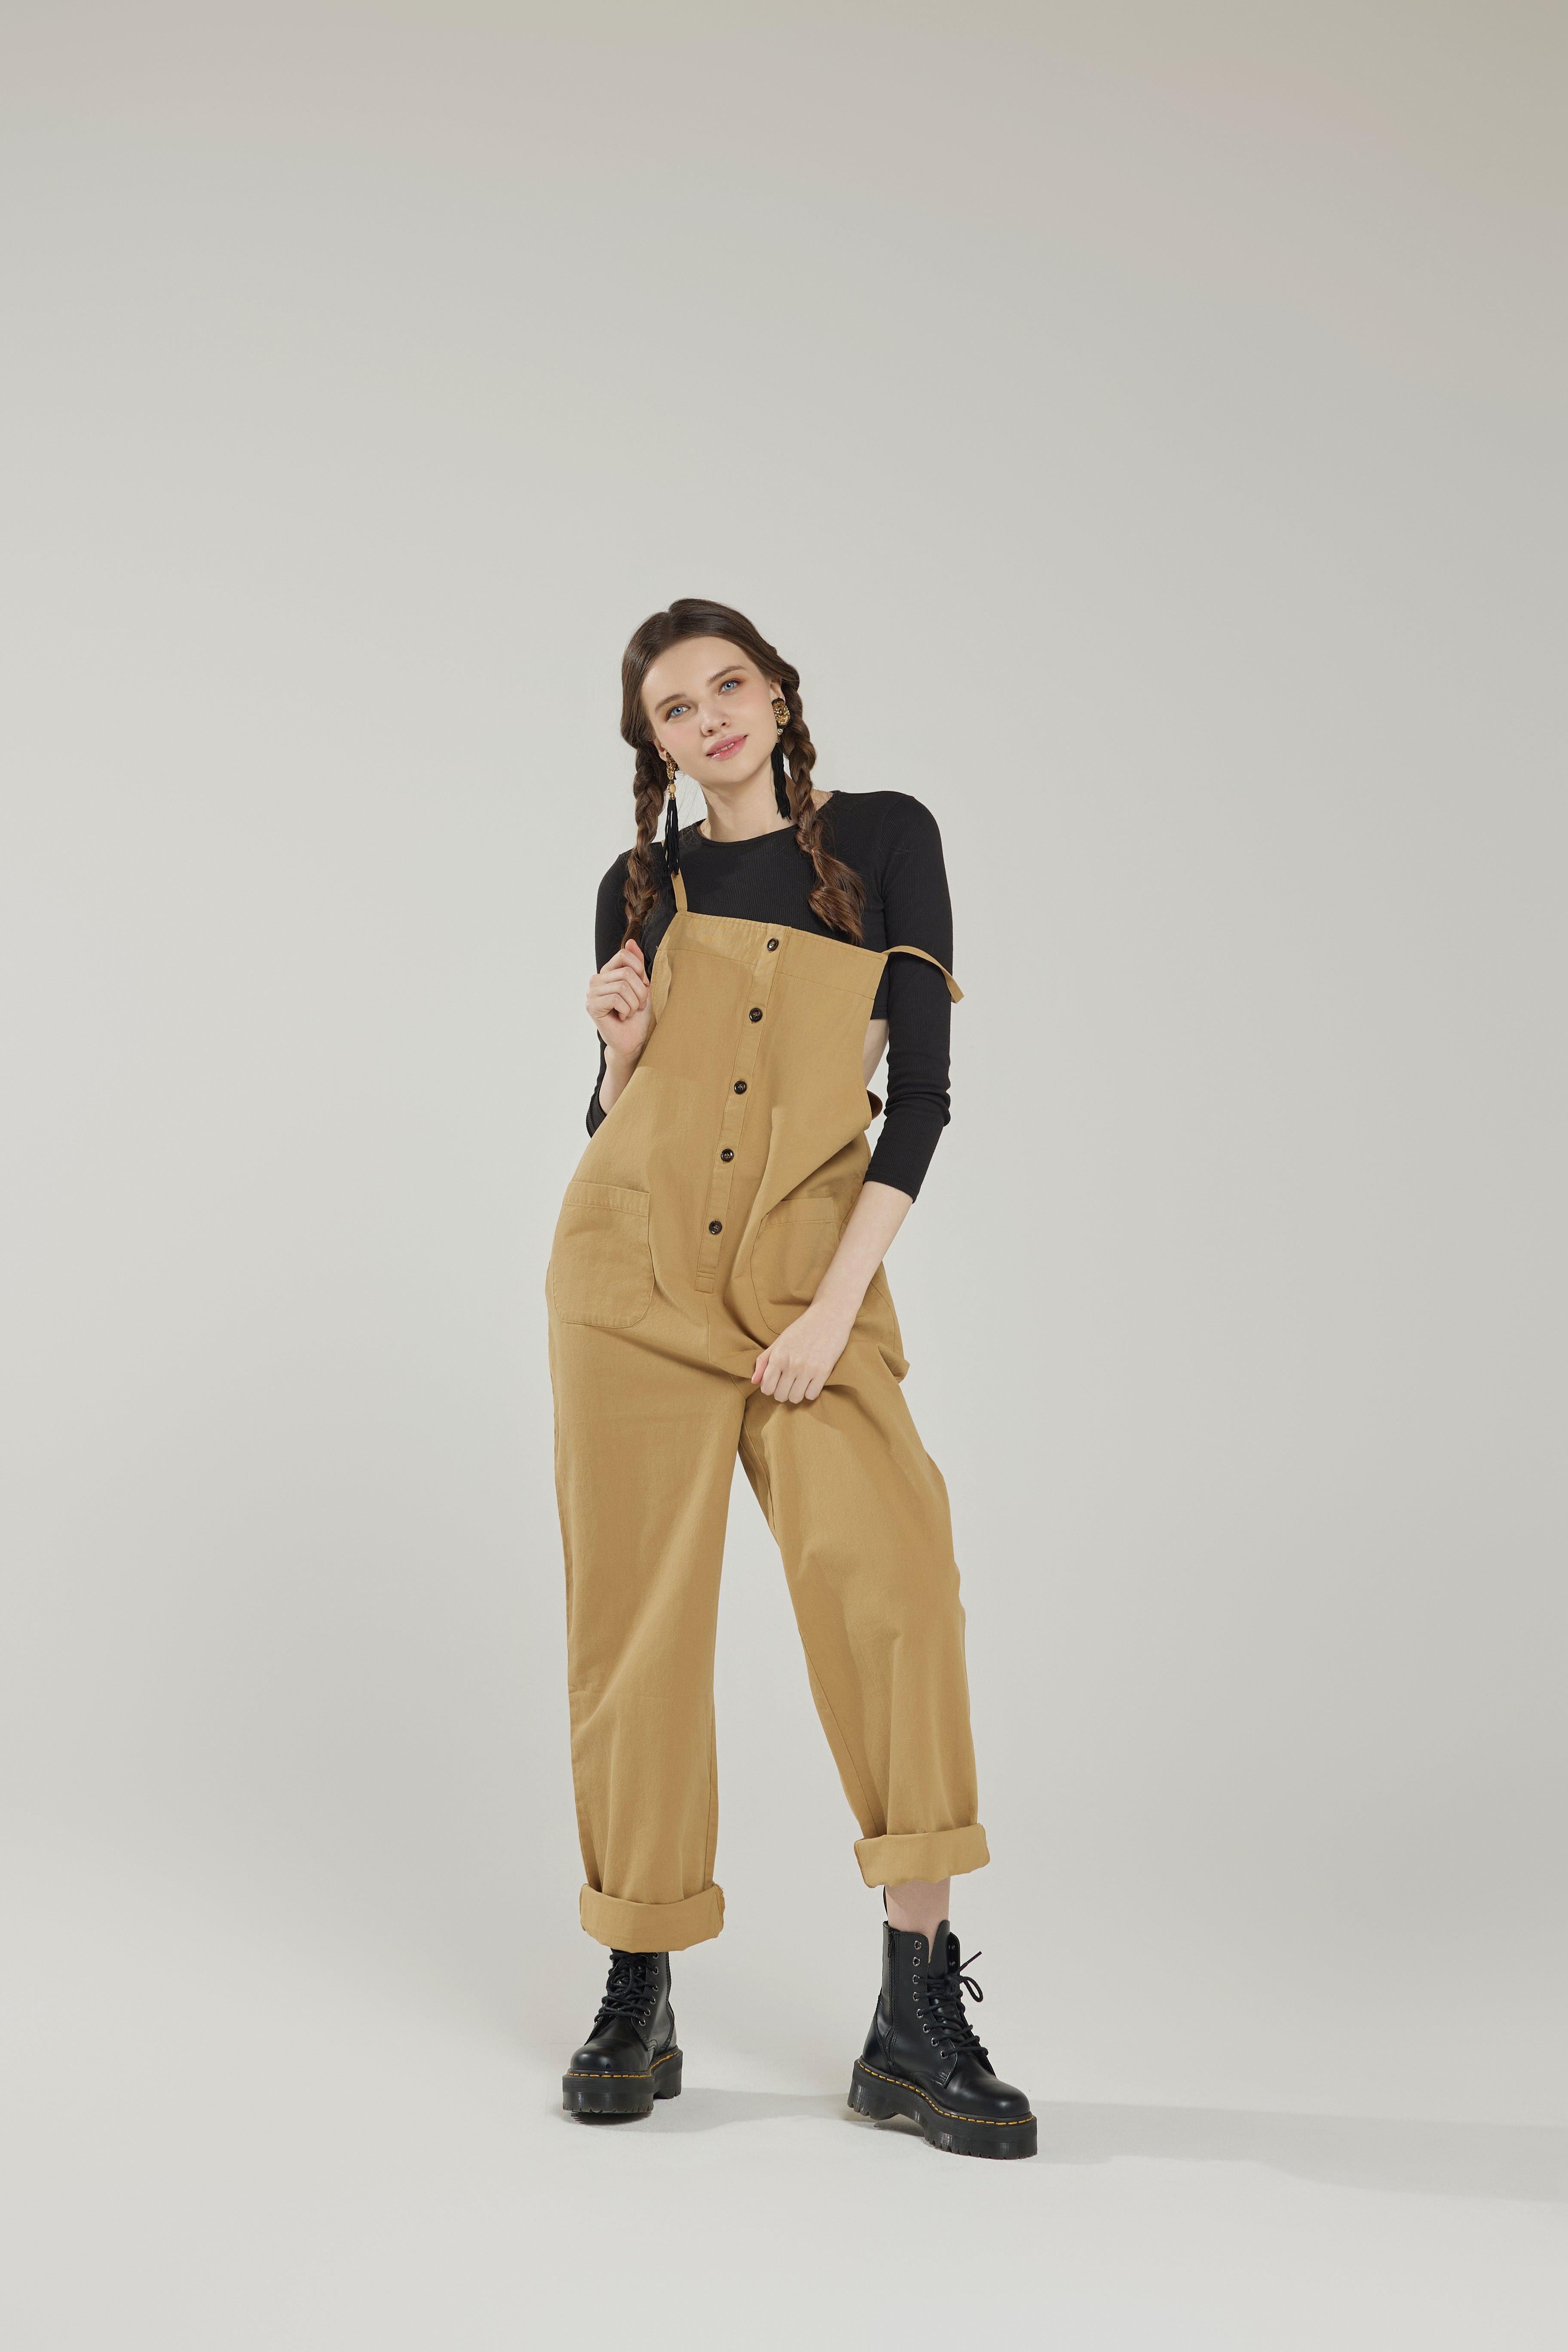 100% cotton Button Down Sleeveless Overalls Jumpsuit with Pockets - Sand - noflik